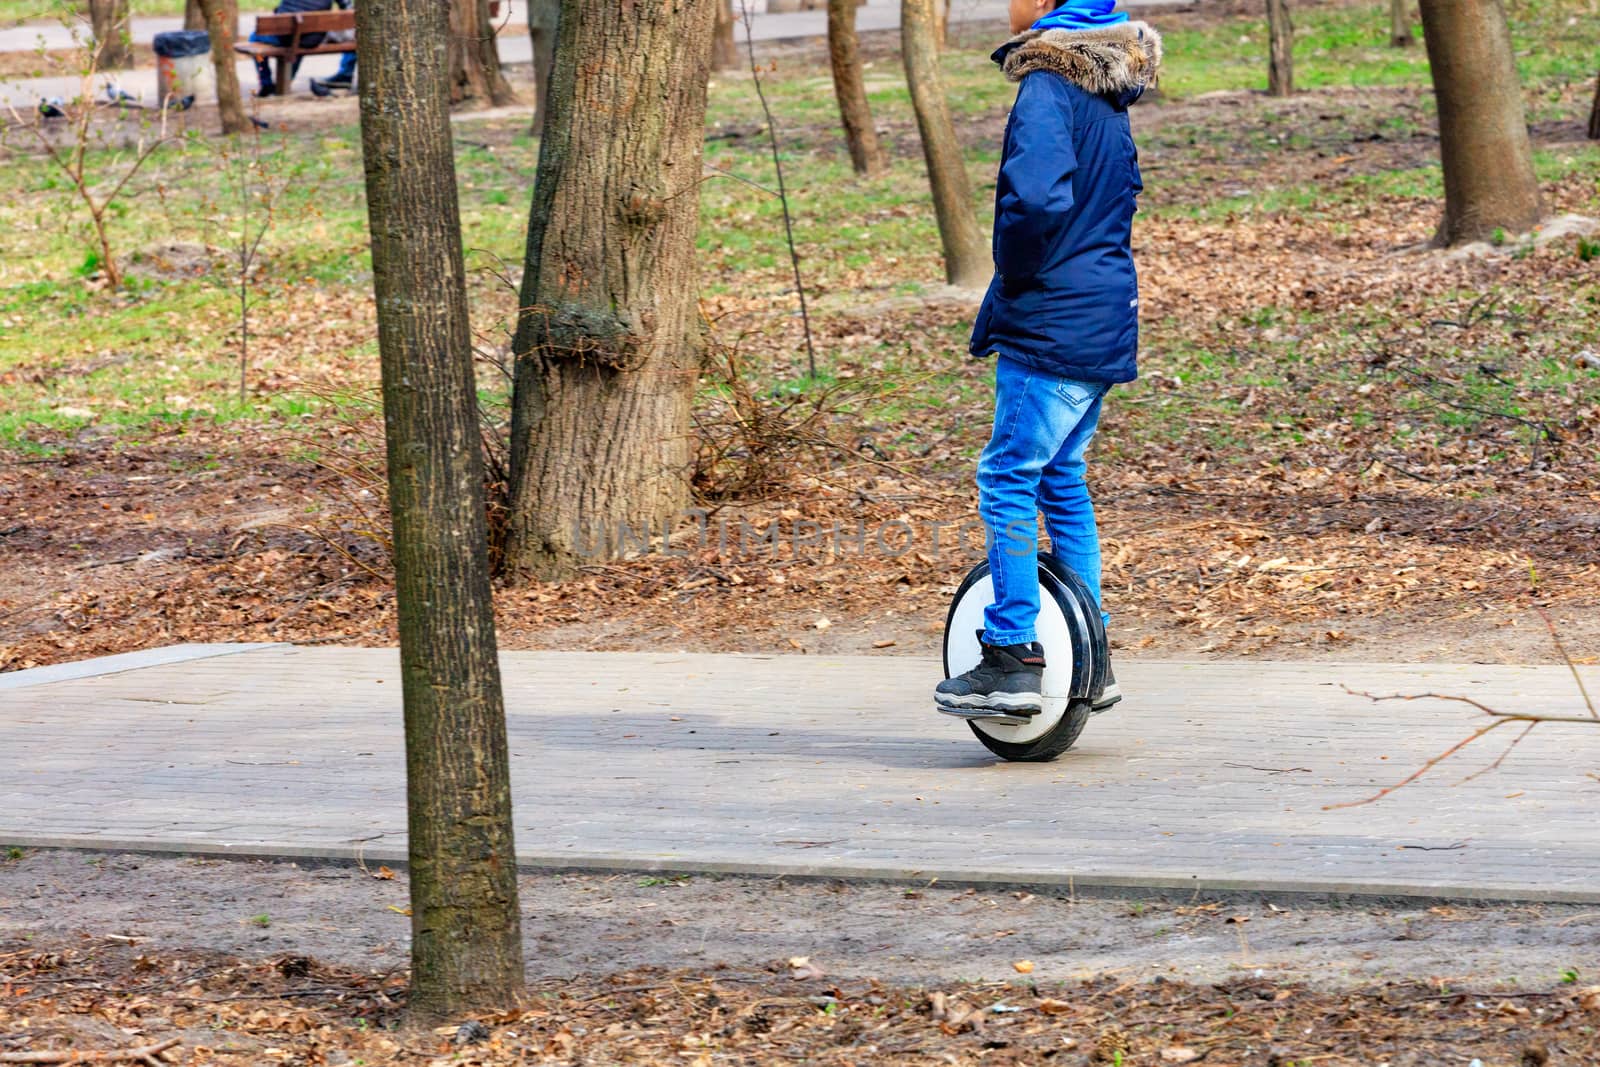 A man in a blue jacket moves on an electric unicycle on the sidewalk among the trees of the city park - a modern concept of freedom of movement.